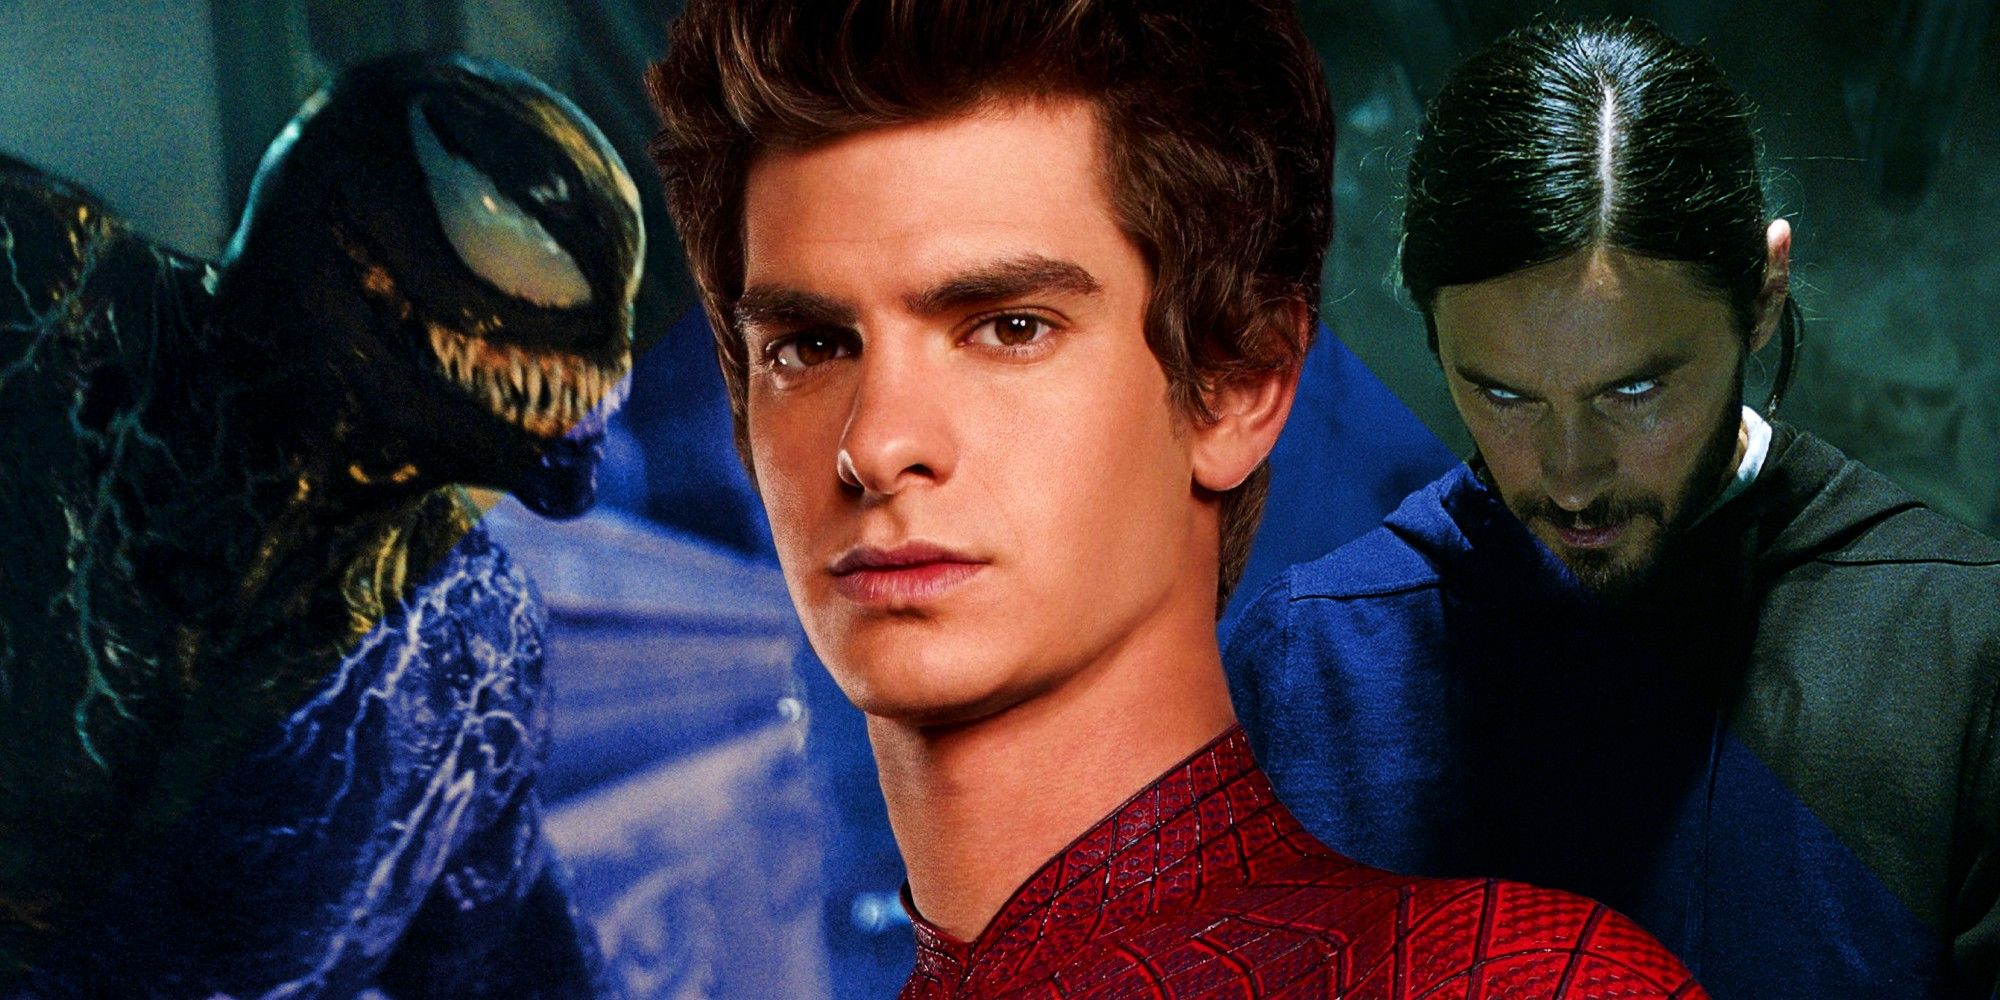 Andrew Garfield's Perfect Spider-Man Future Is As Sony's Spidey